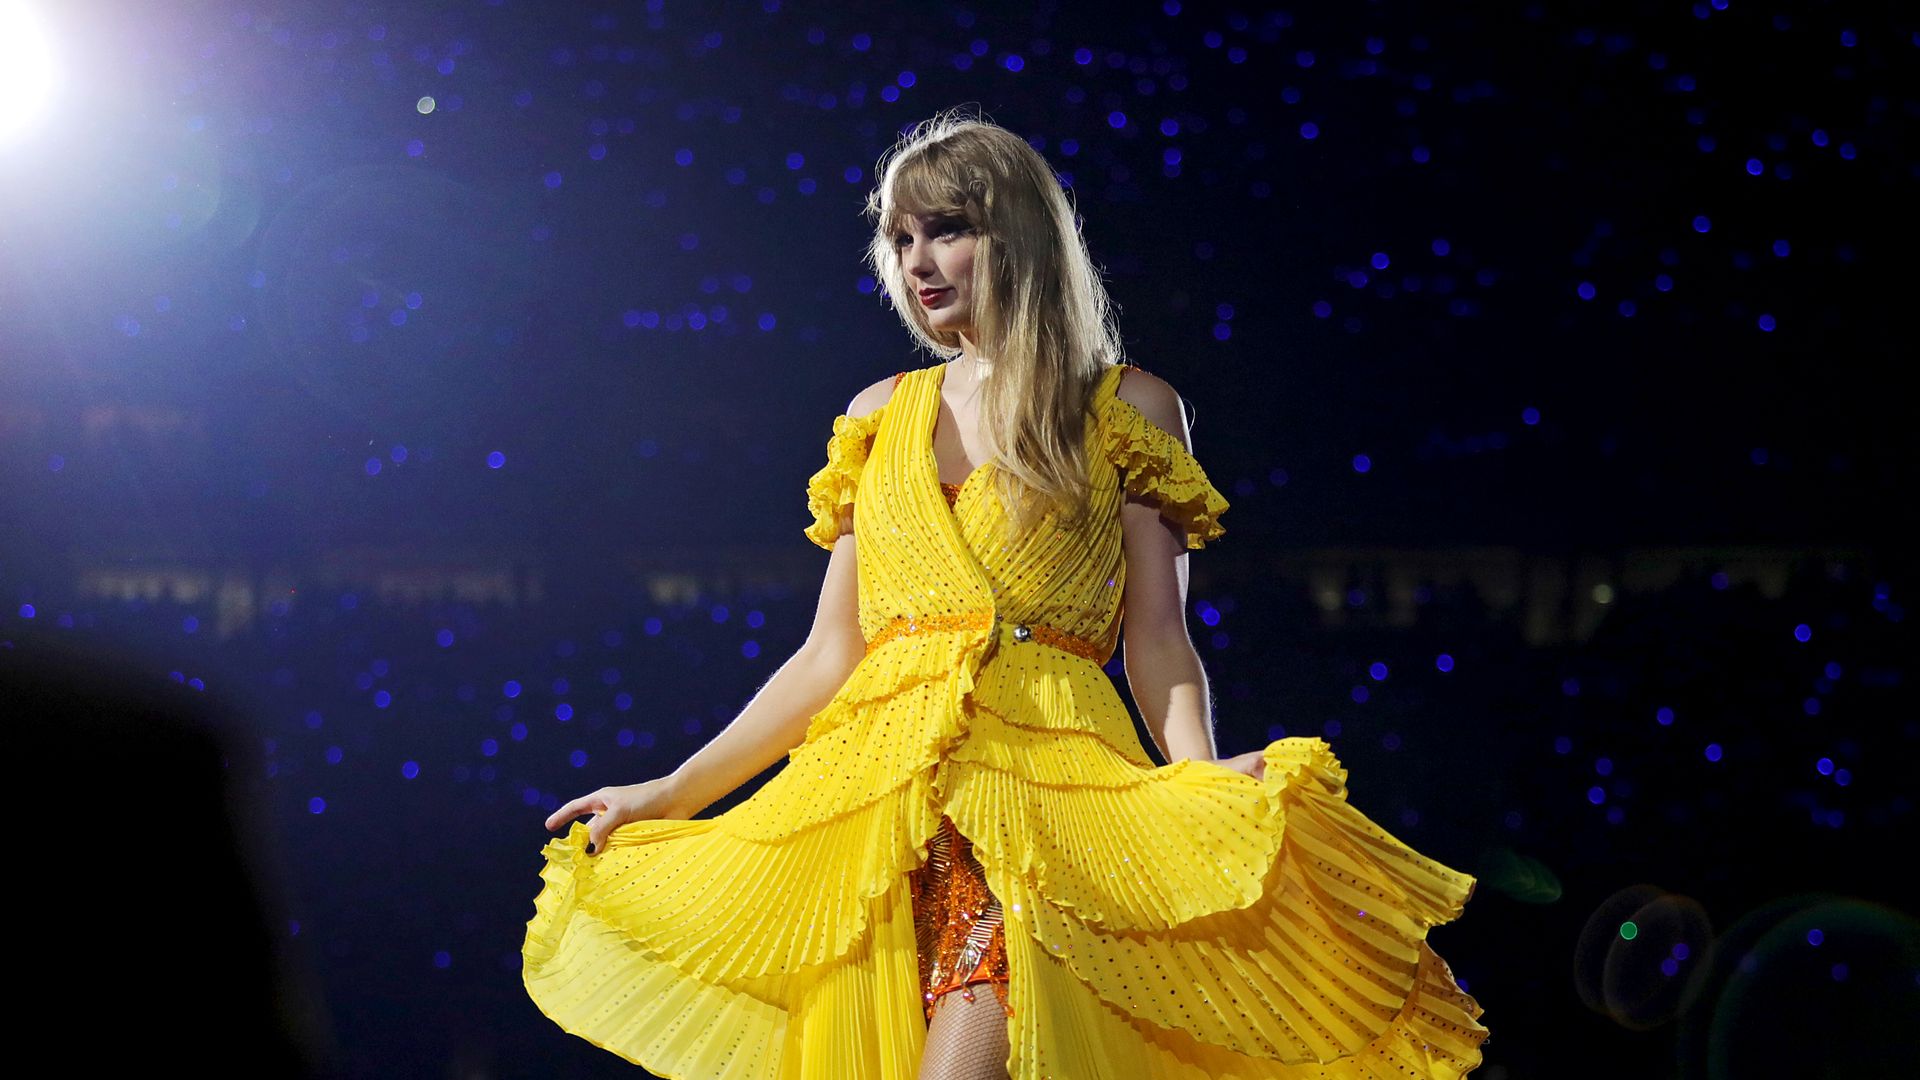 Photo of Taylor Swift in a yellow dress